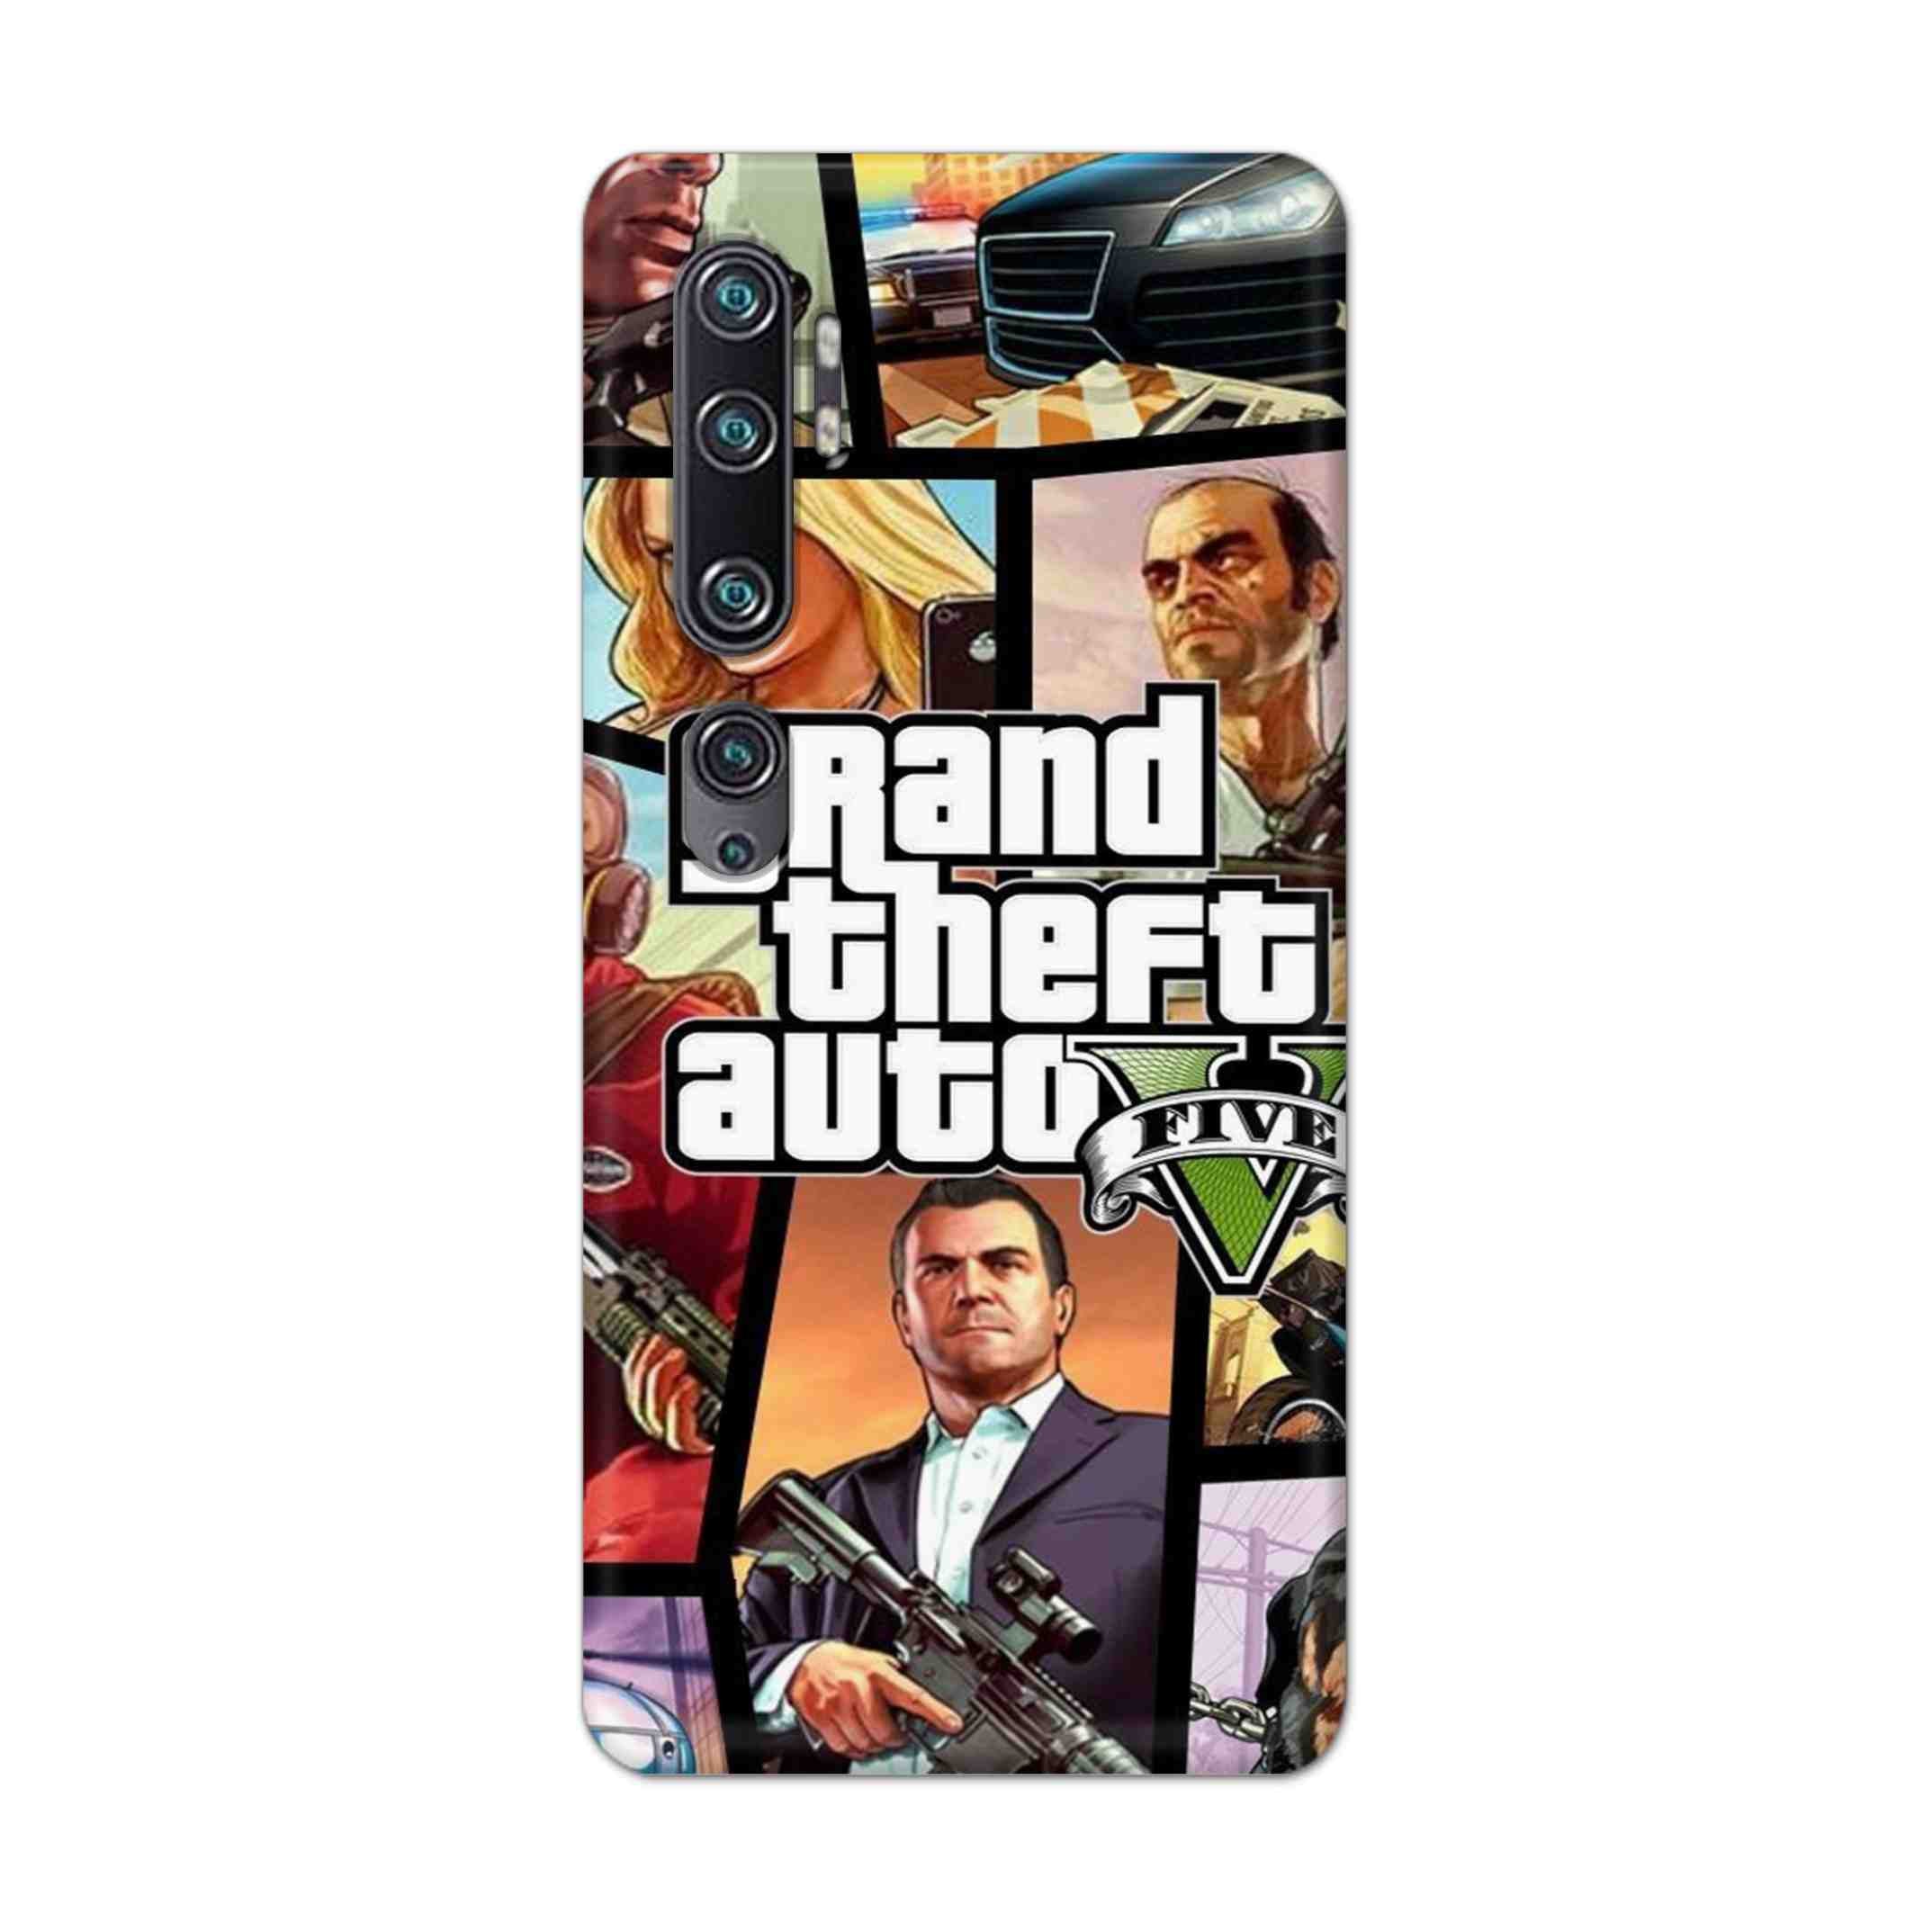 Buy Grand Theft Auto 5 Hard Back Mobile Phone Case Cover For Xiaomi Mi Note 10 Pro Online